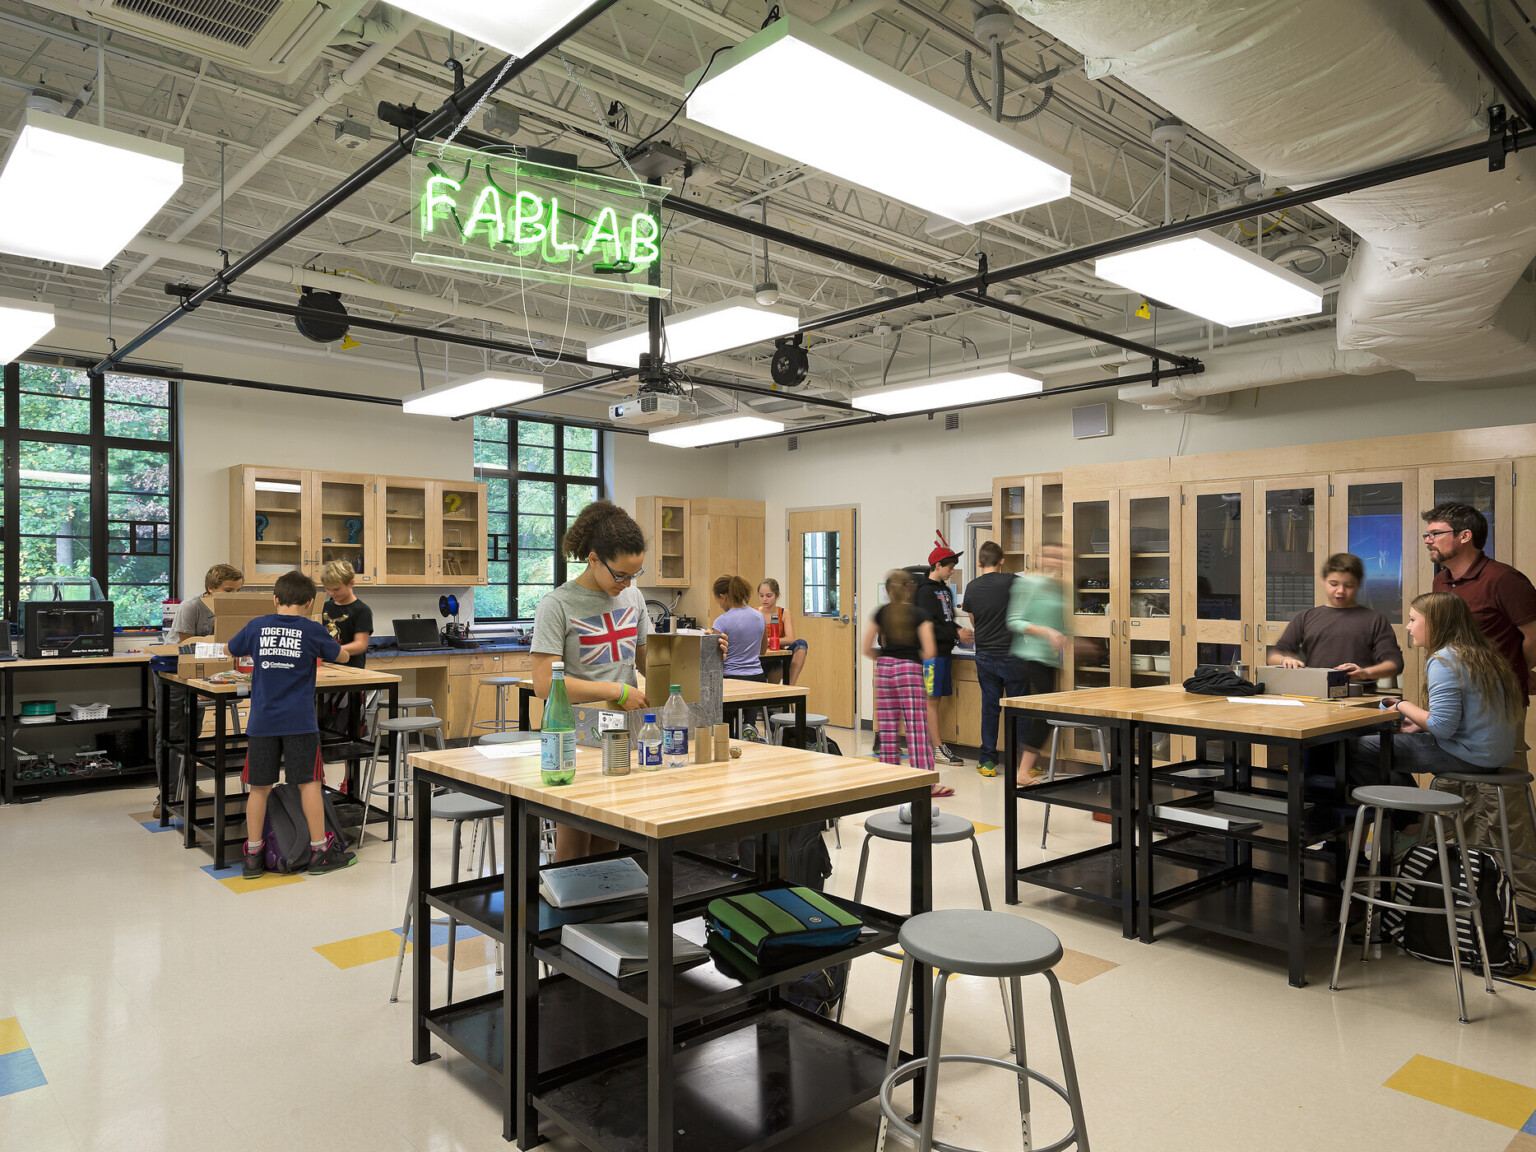 students collaborate in well-lit open-concept learning environment, floor-ceiling windows, natural lighting and natural light wood desks and work tables, neon light sign says, "fablab"